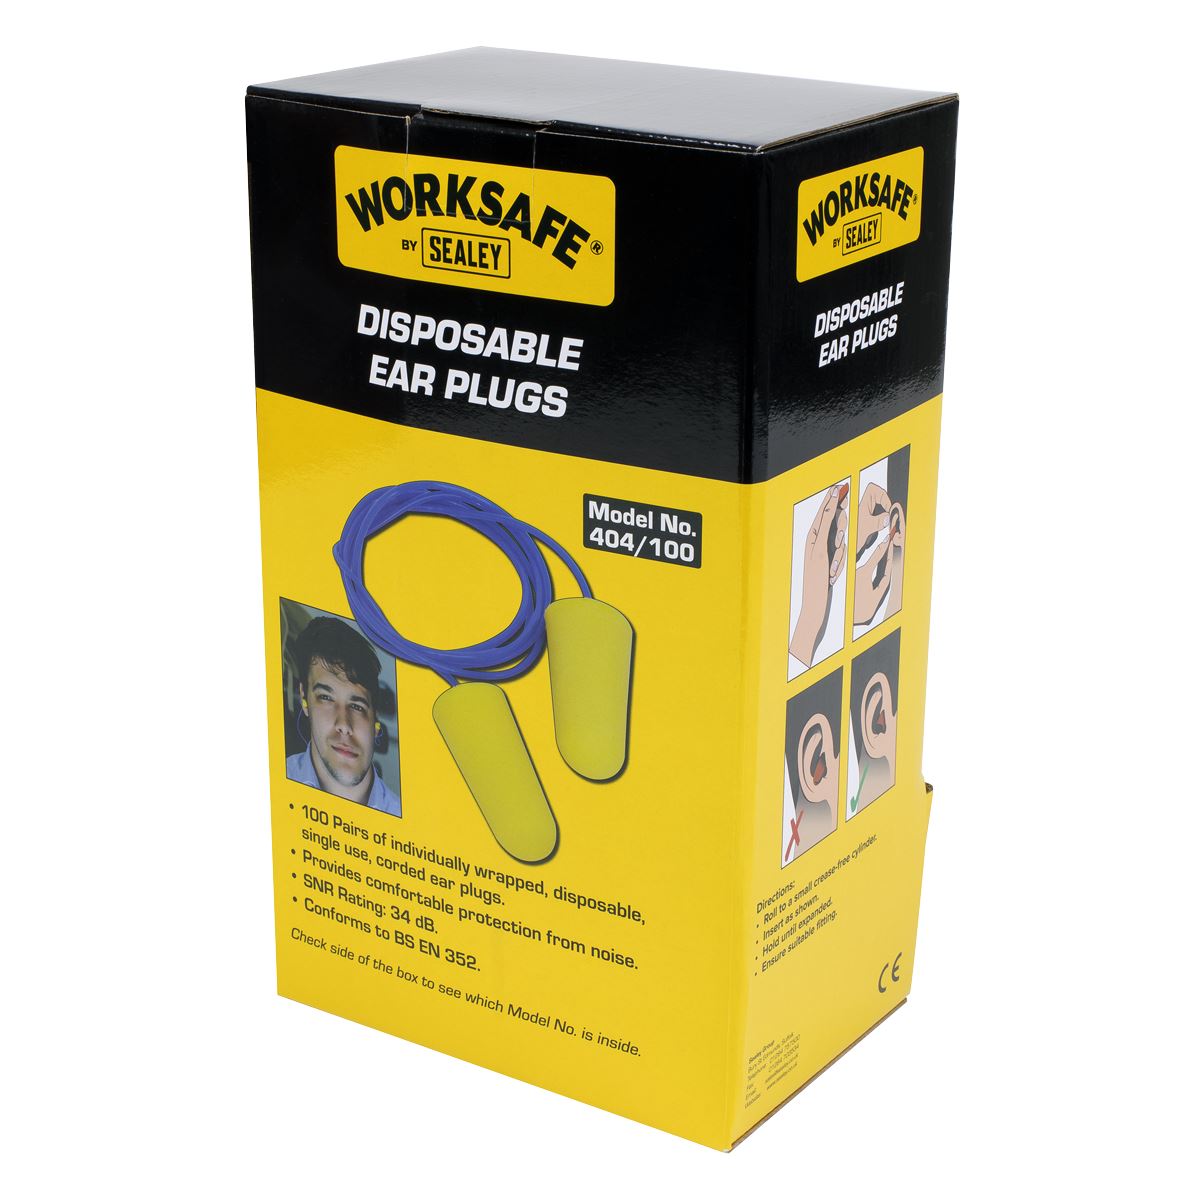 Worksafe by Sealey Ear Plugs Disposable Corded Pack of 100 Pairs